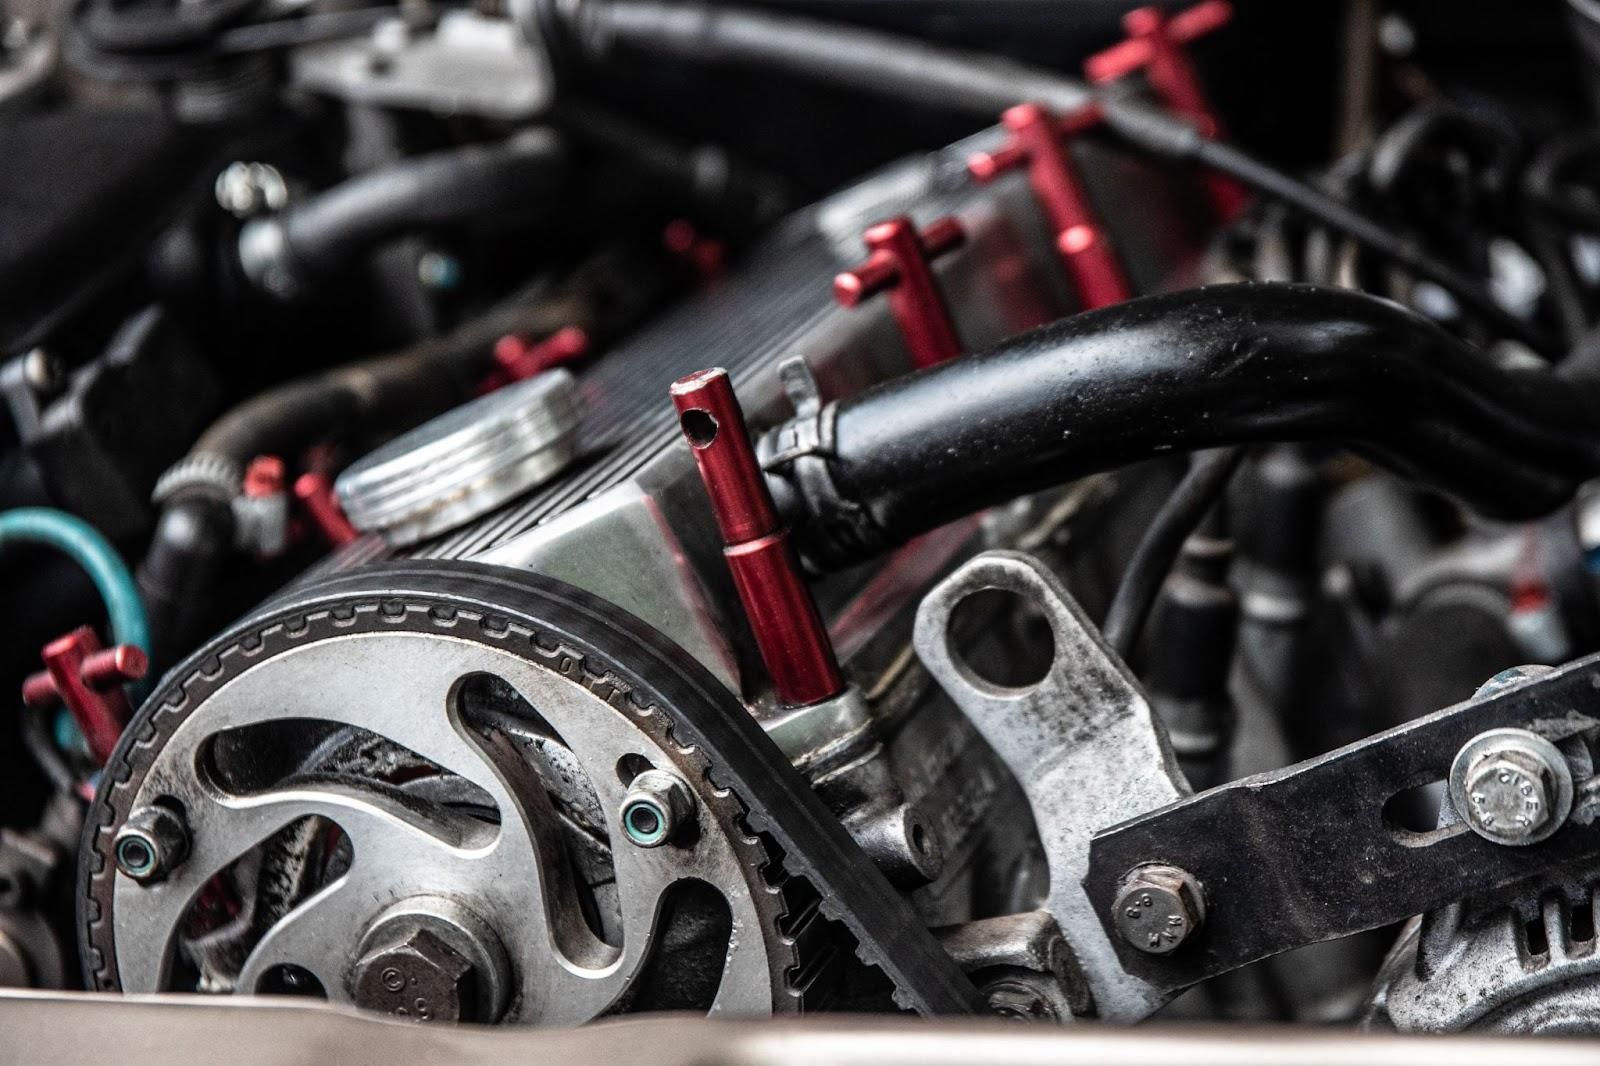 Timing Belt Service at ﻿Capeway Auto Service and Towing﻿ in ﻿Hanover, MA﻿